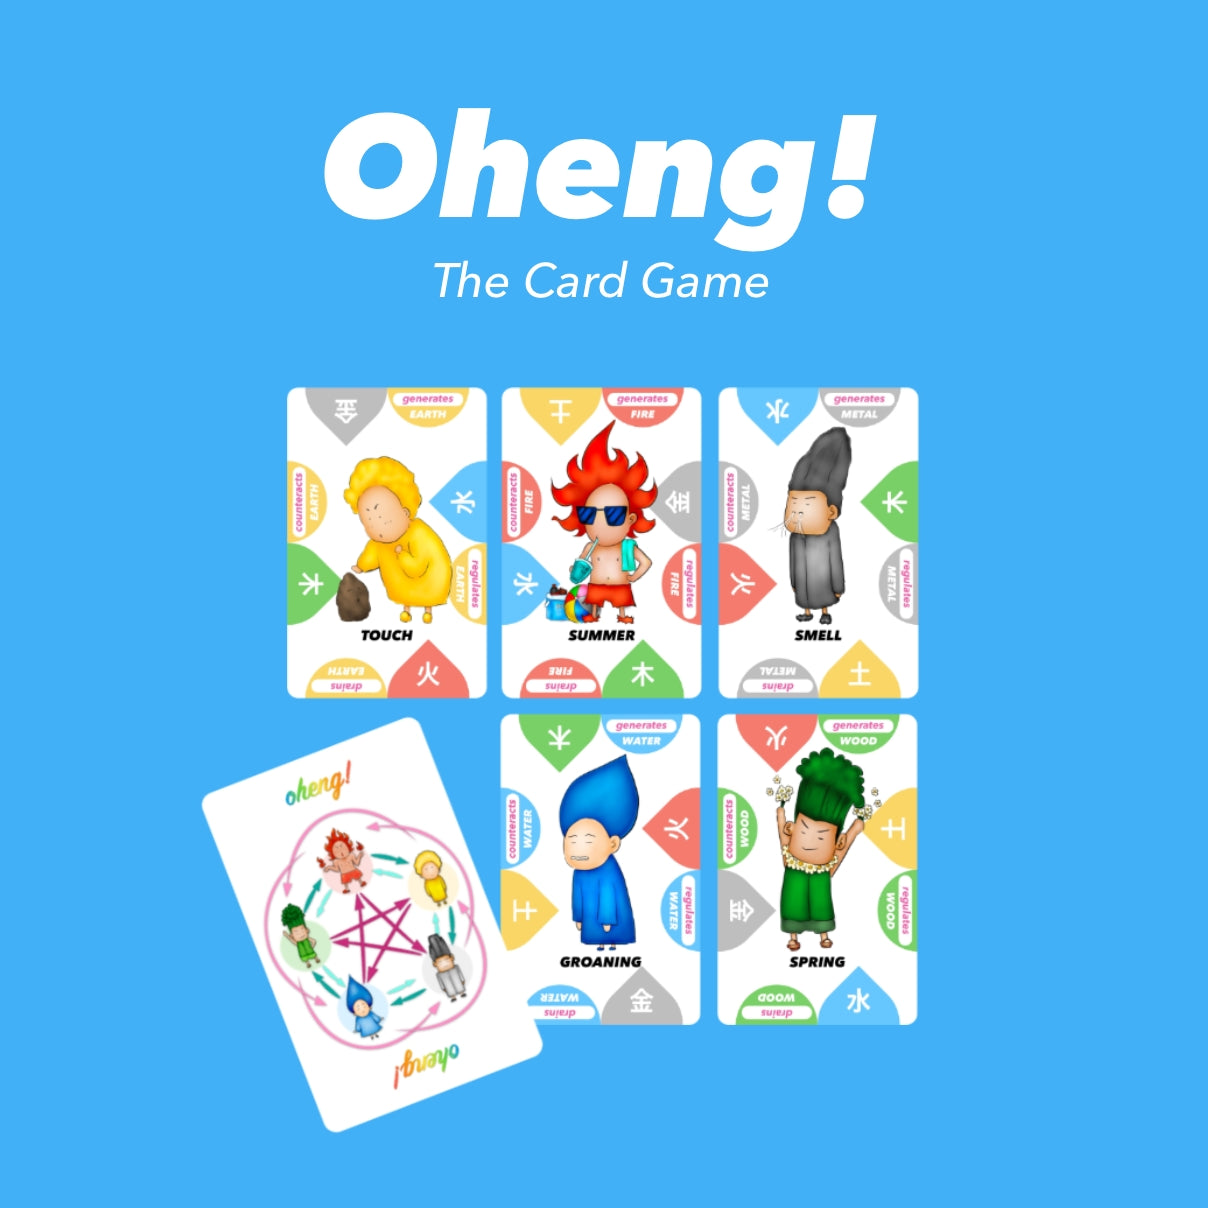 Oheng! Five Elements Card Game